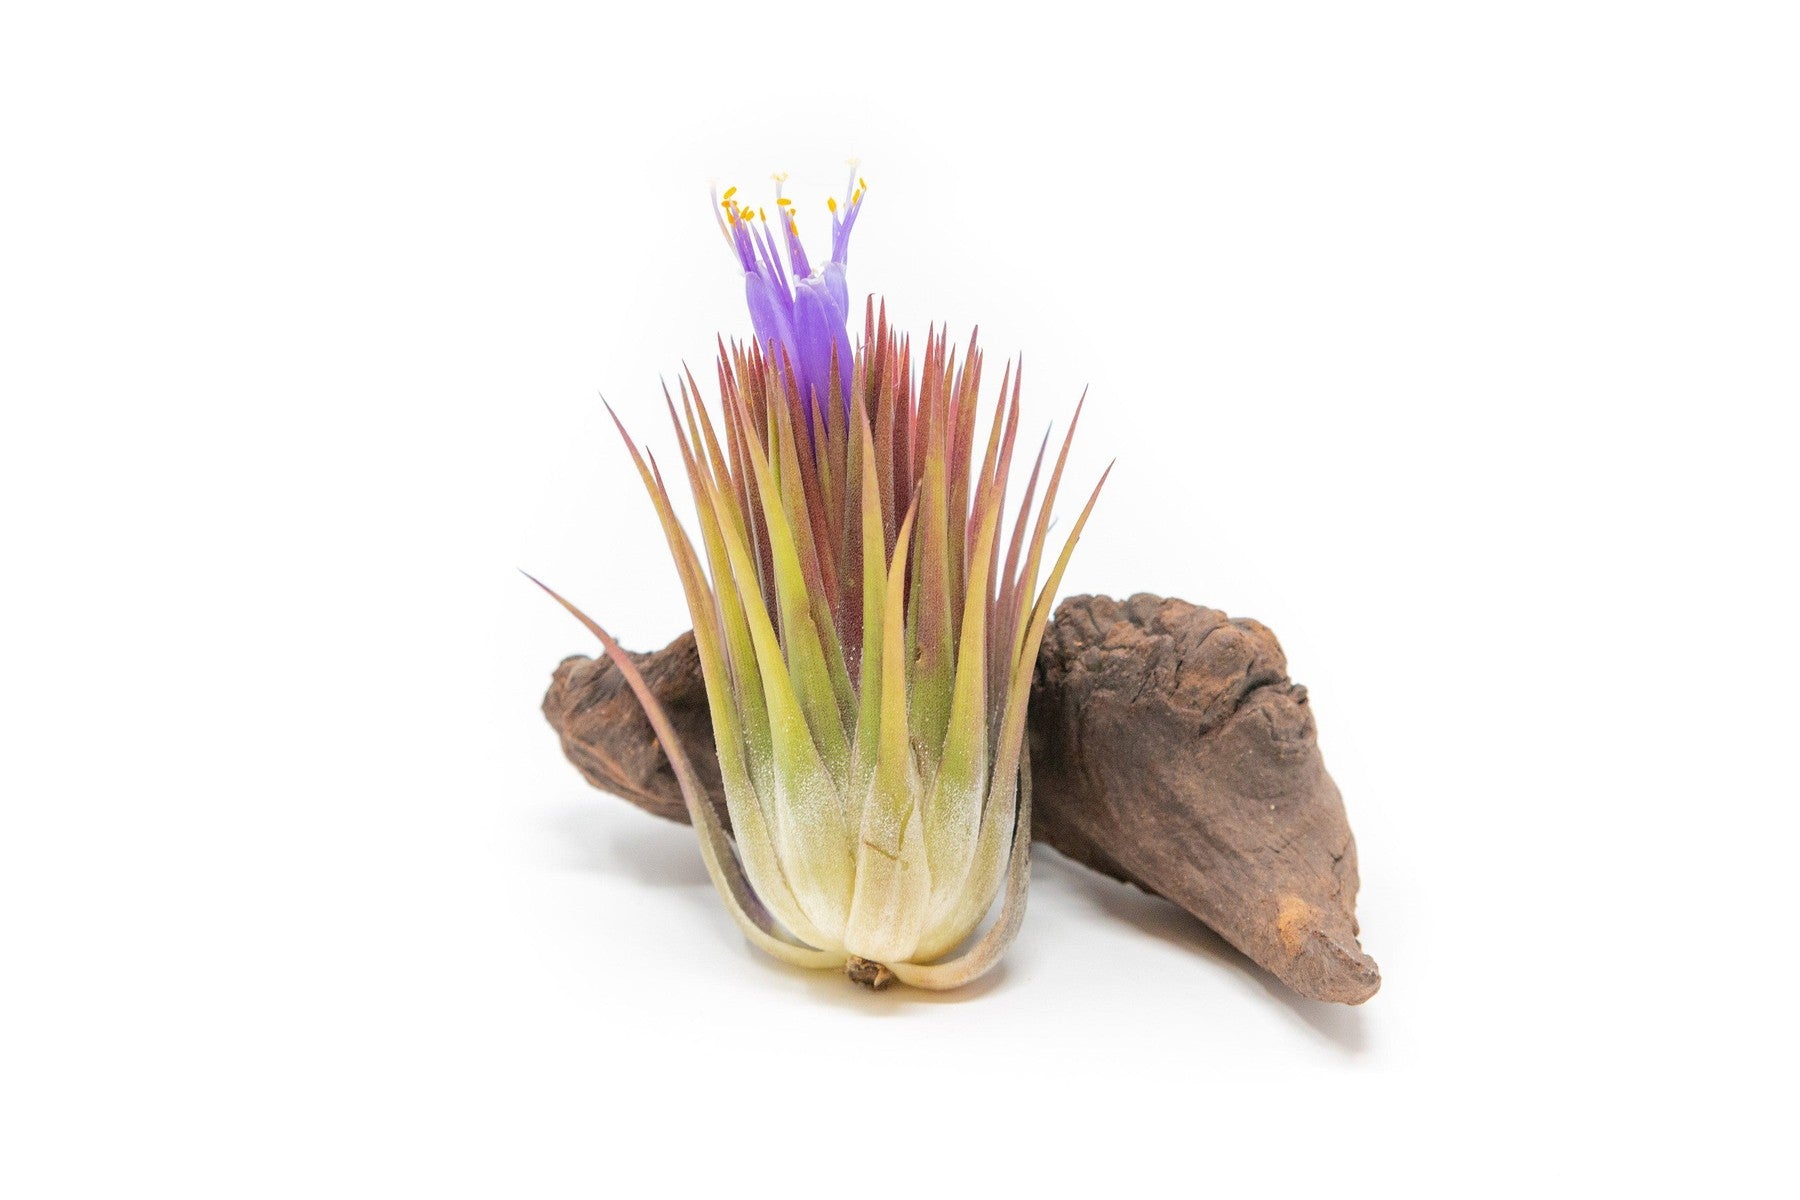 SALE - Tillandsia Ionantha Guatemala "Macho" Air Plants - Set of 5 or 10 - 30% Off-airplant-The Succulent Source